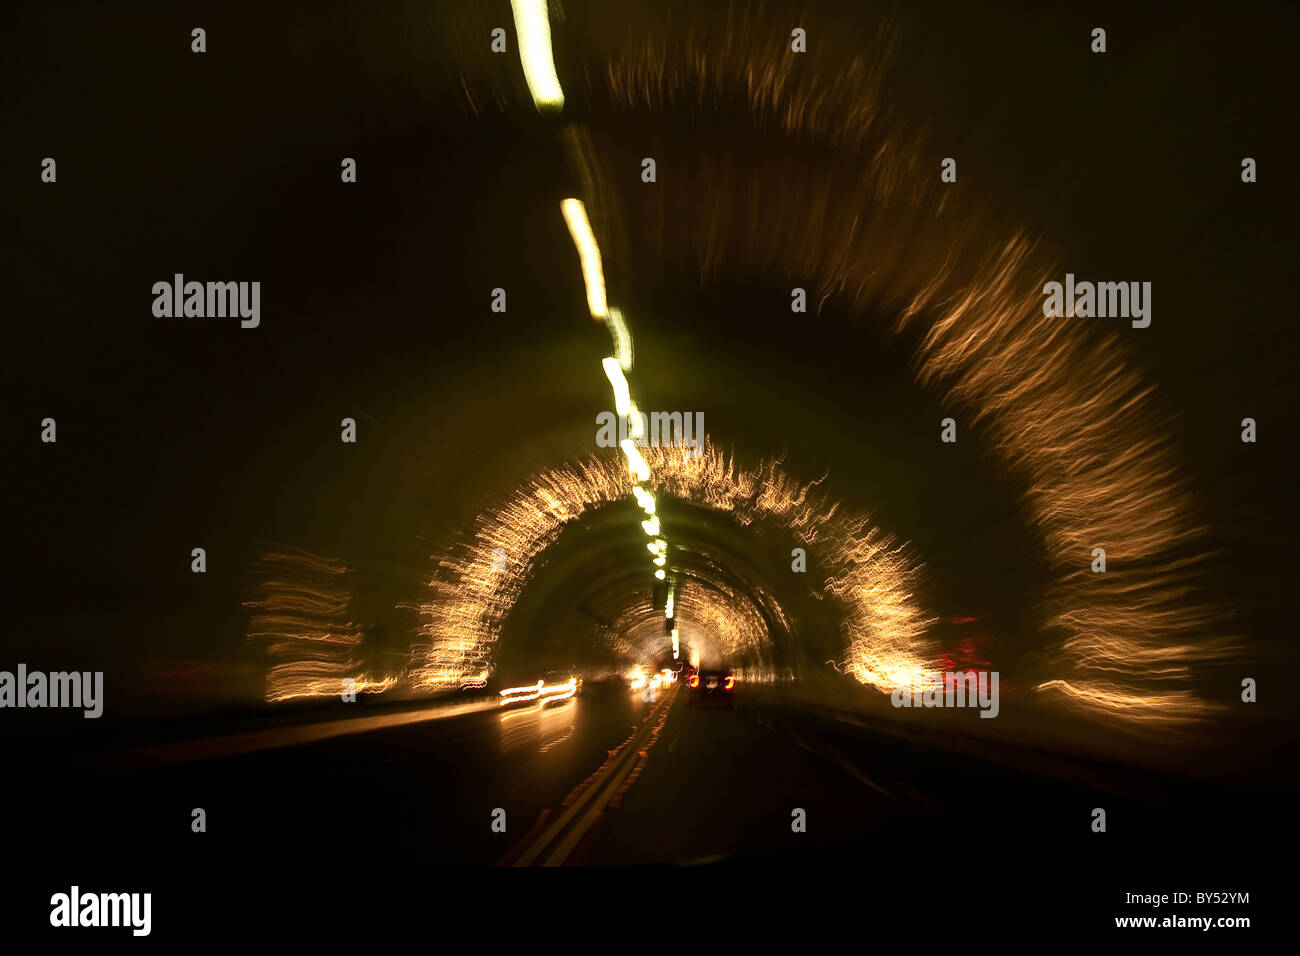 Car speeding through a tunnel with head lights and tail lights reflecting off  dome and sides of the tunnel in blur of motion Stock Photo